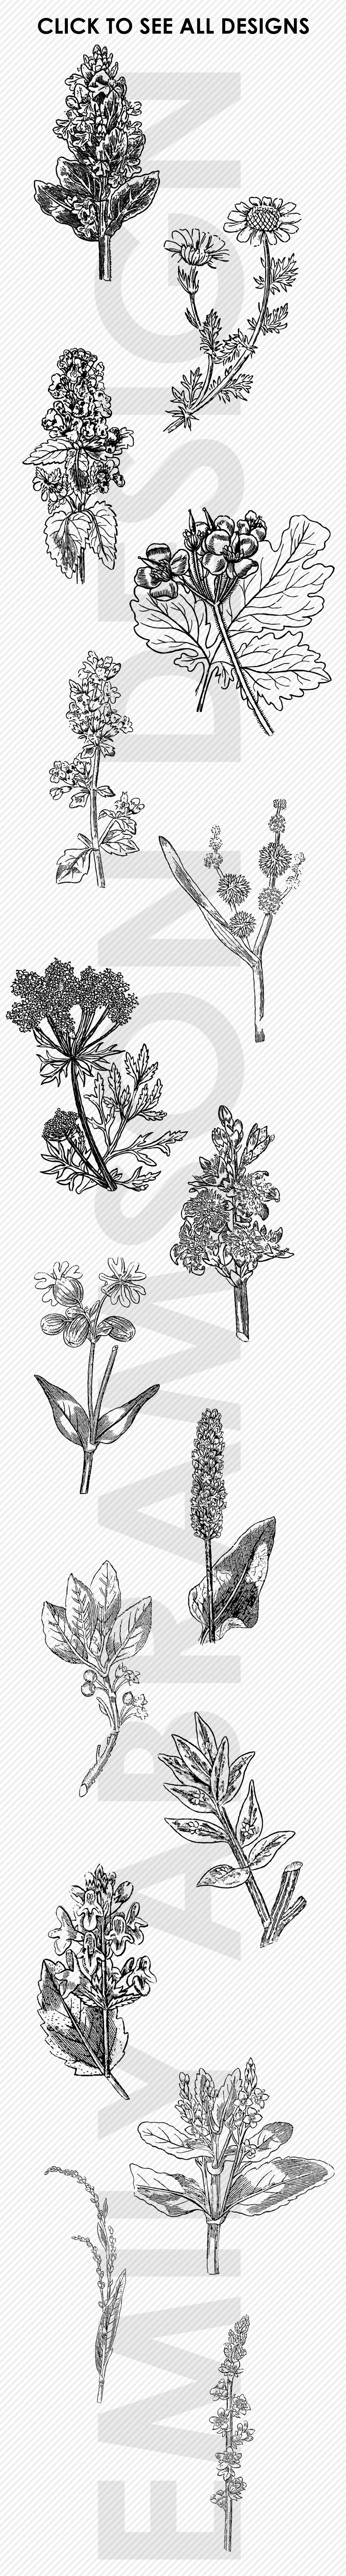 Herbal Photoshop Brushes and Stampspreview image.